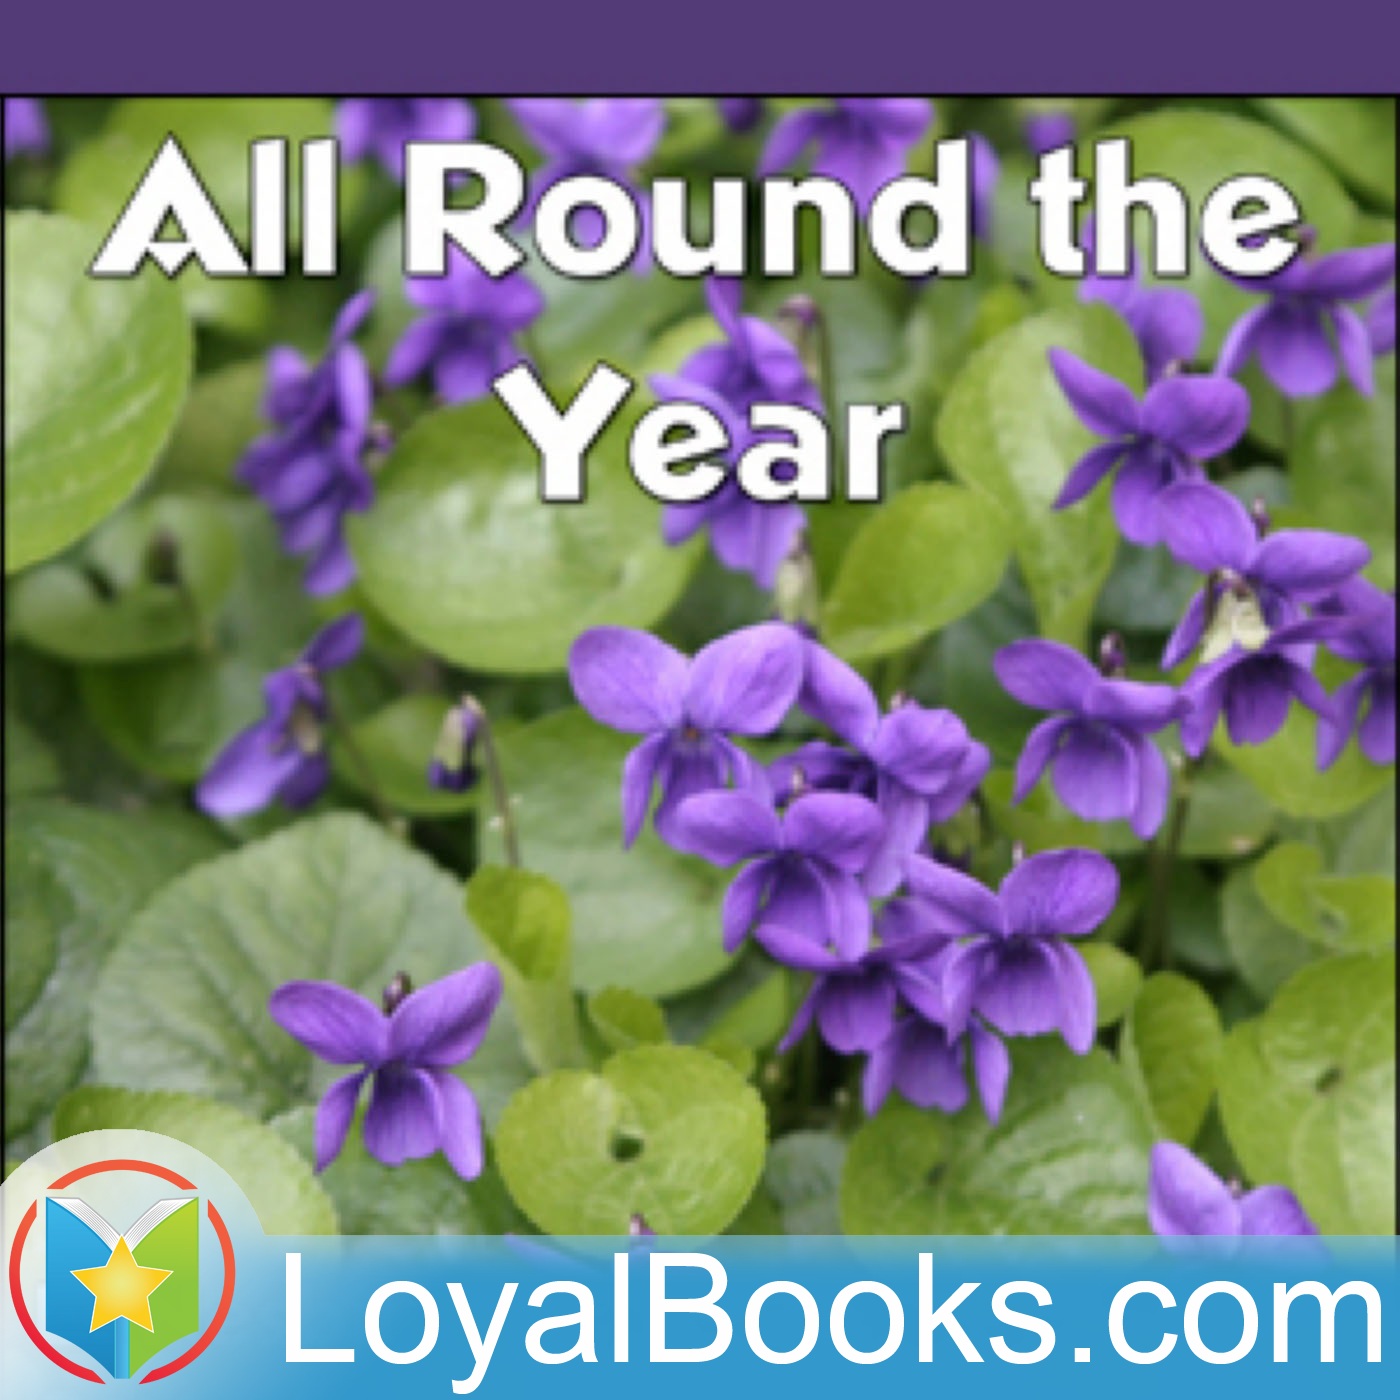 All Round the Year by Edith Nesbit